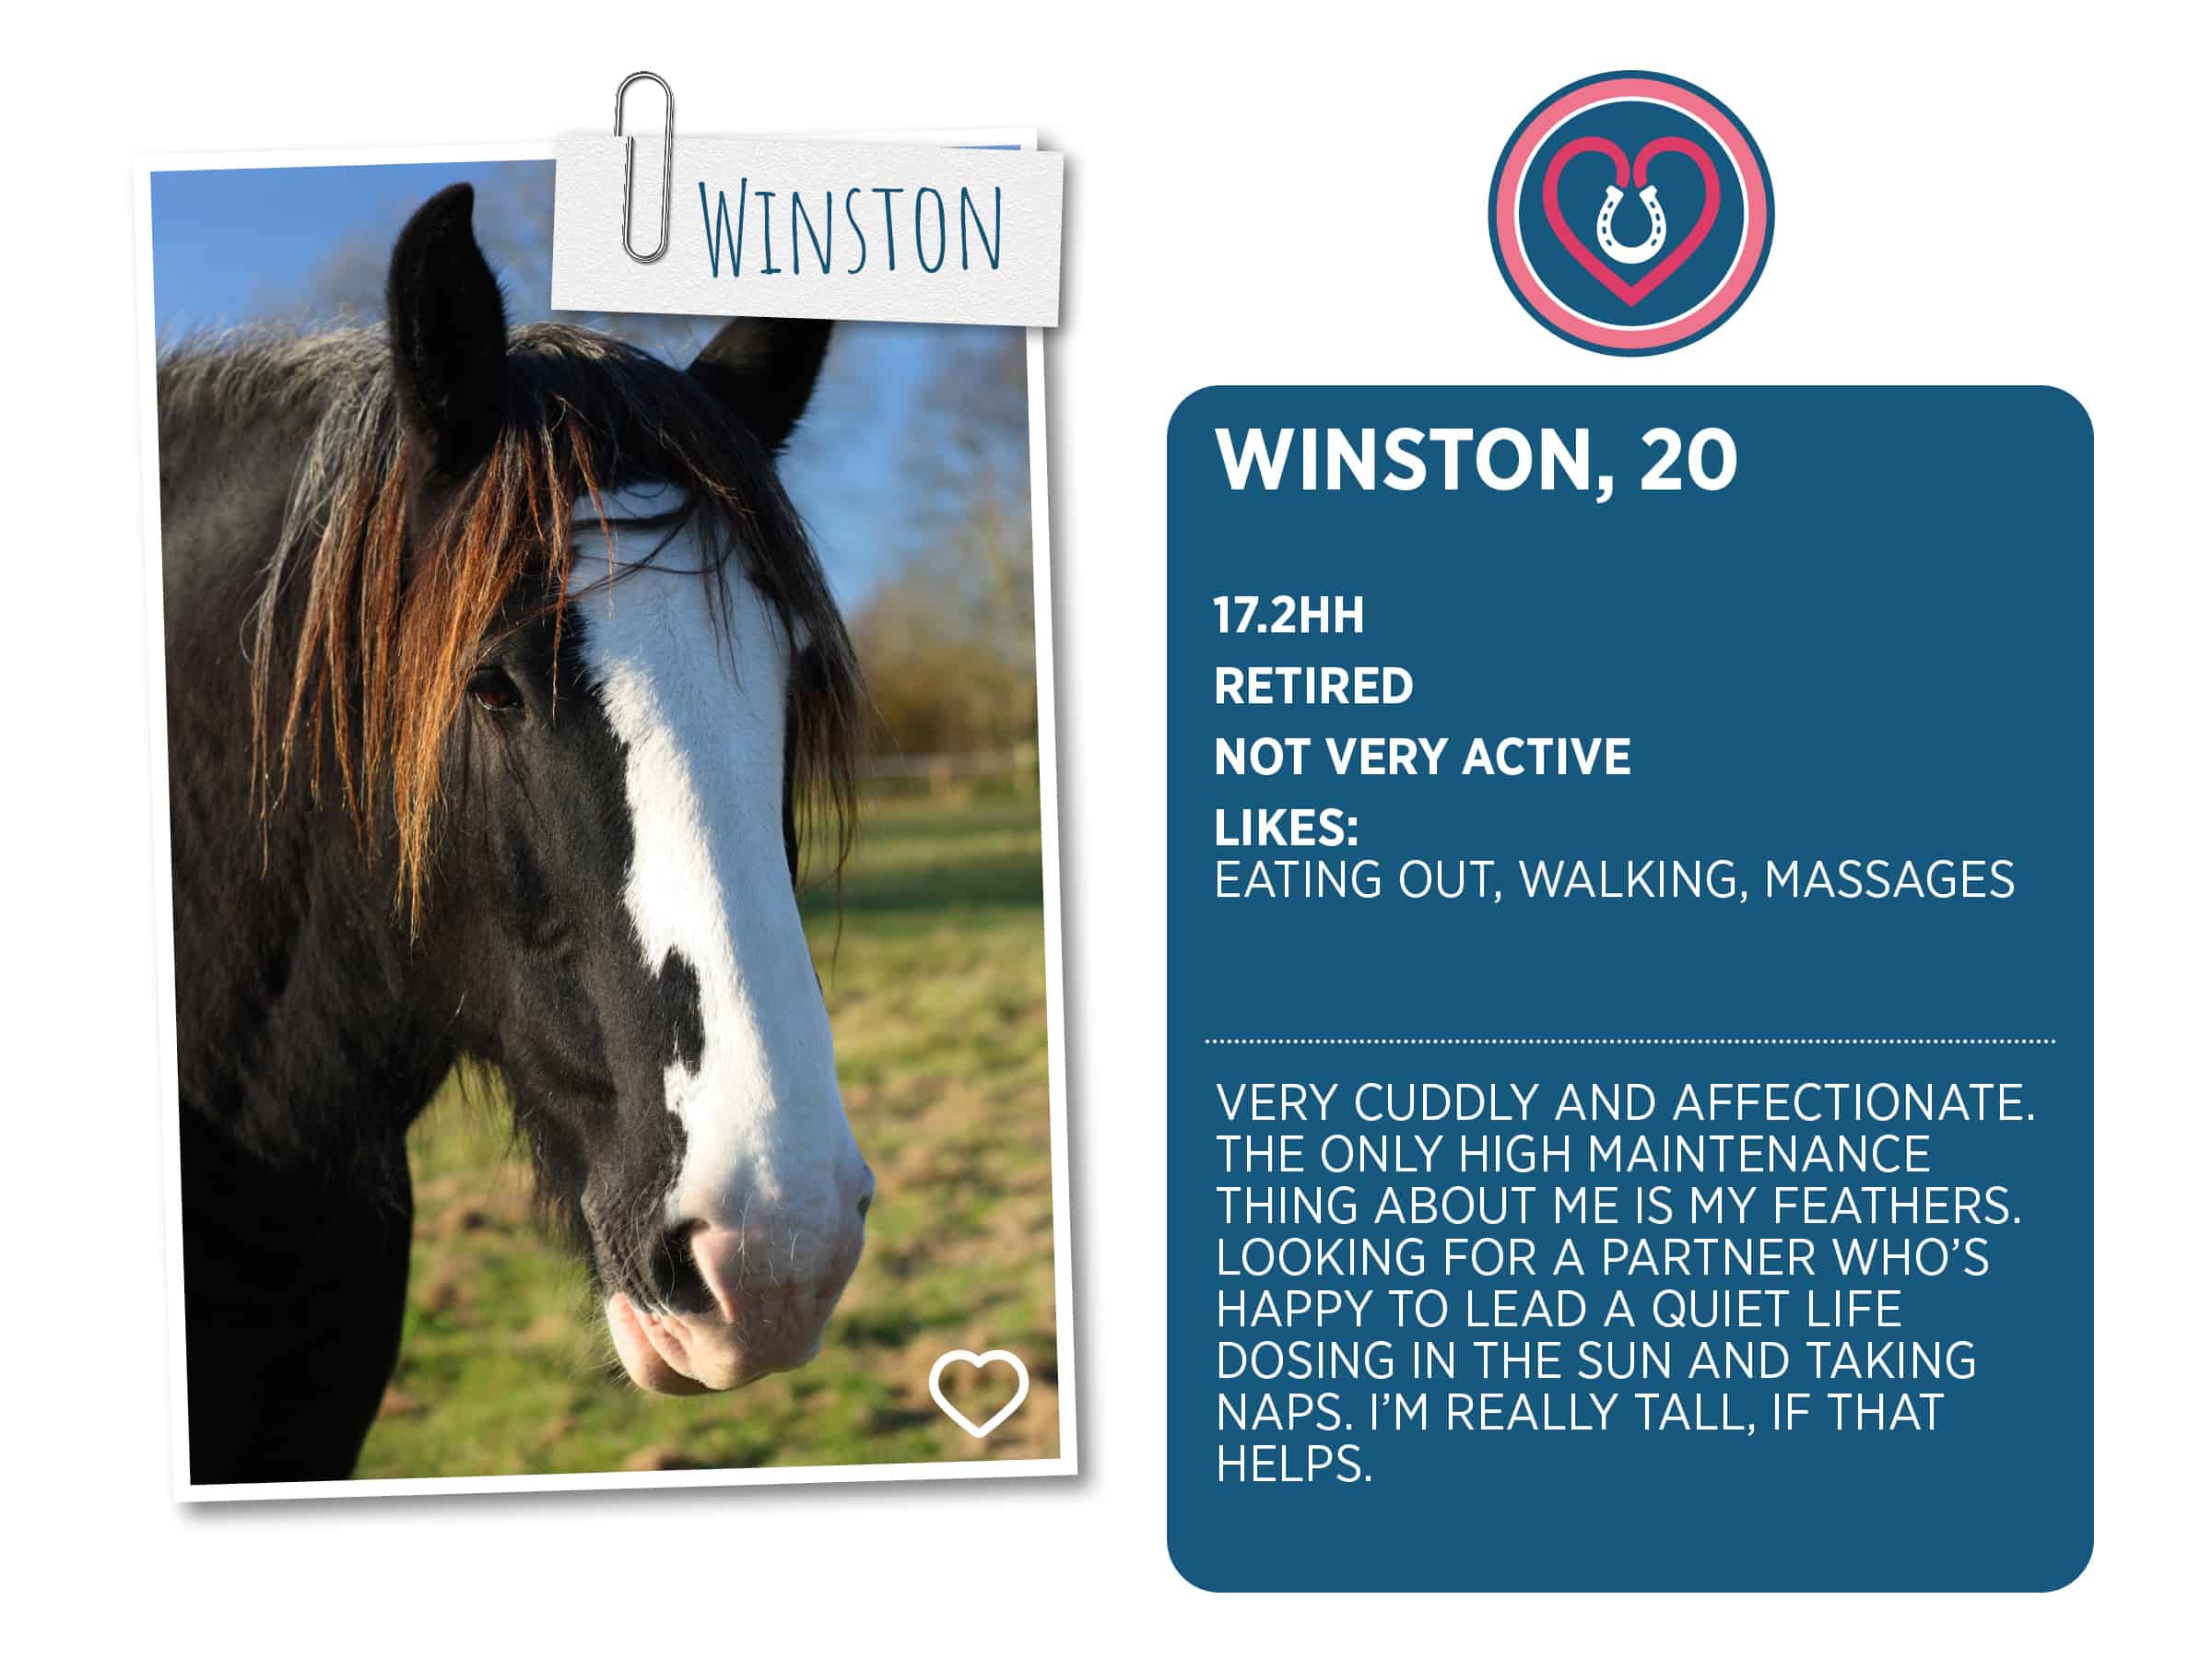 Lonely loves club, Winston profile